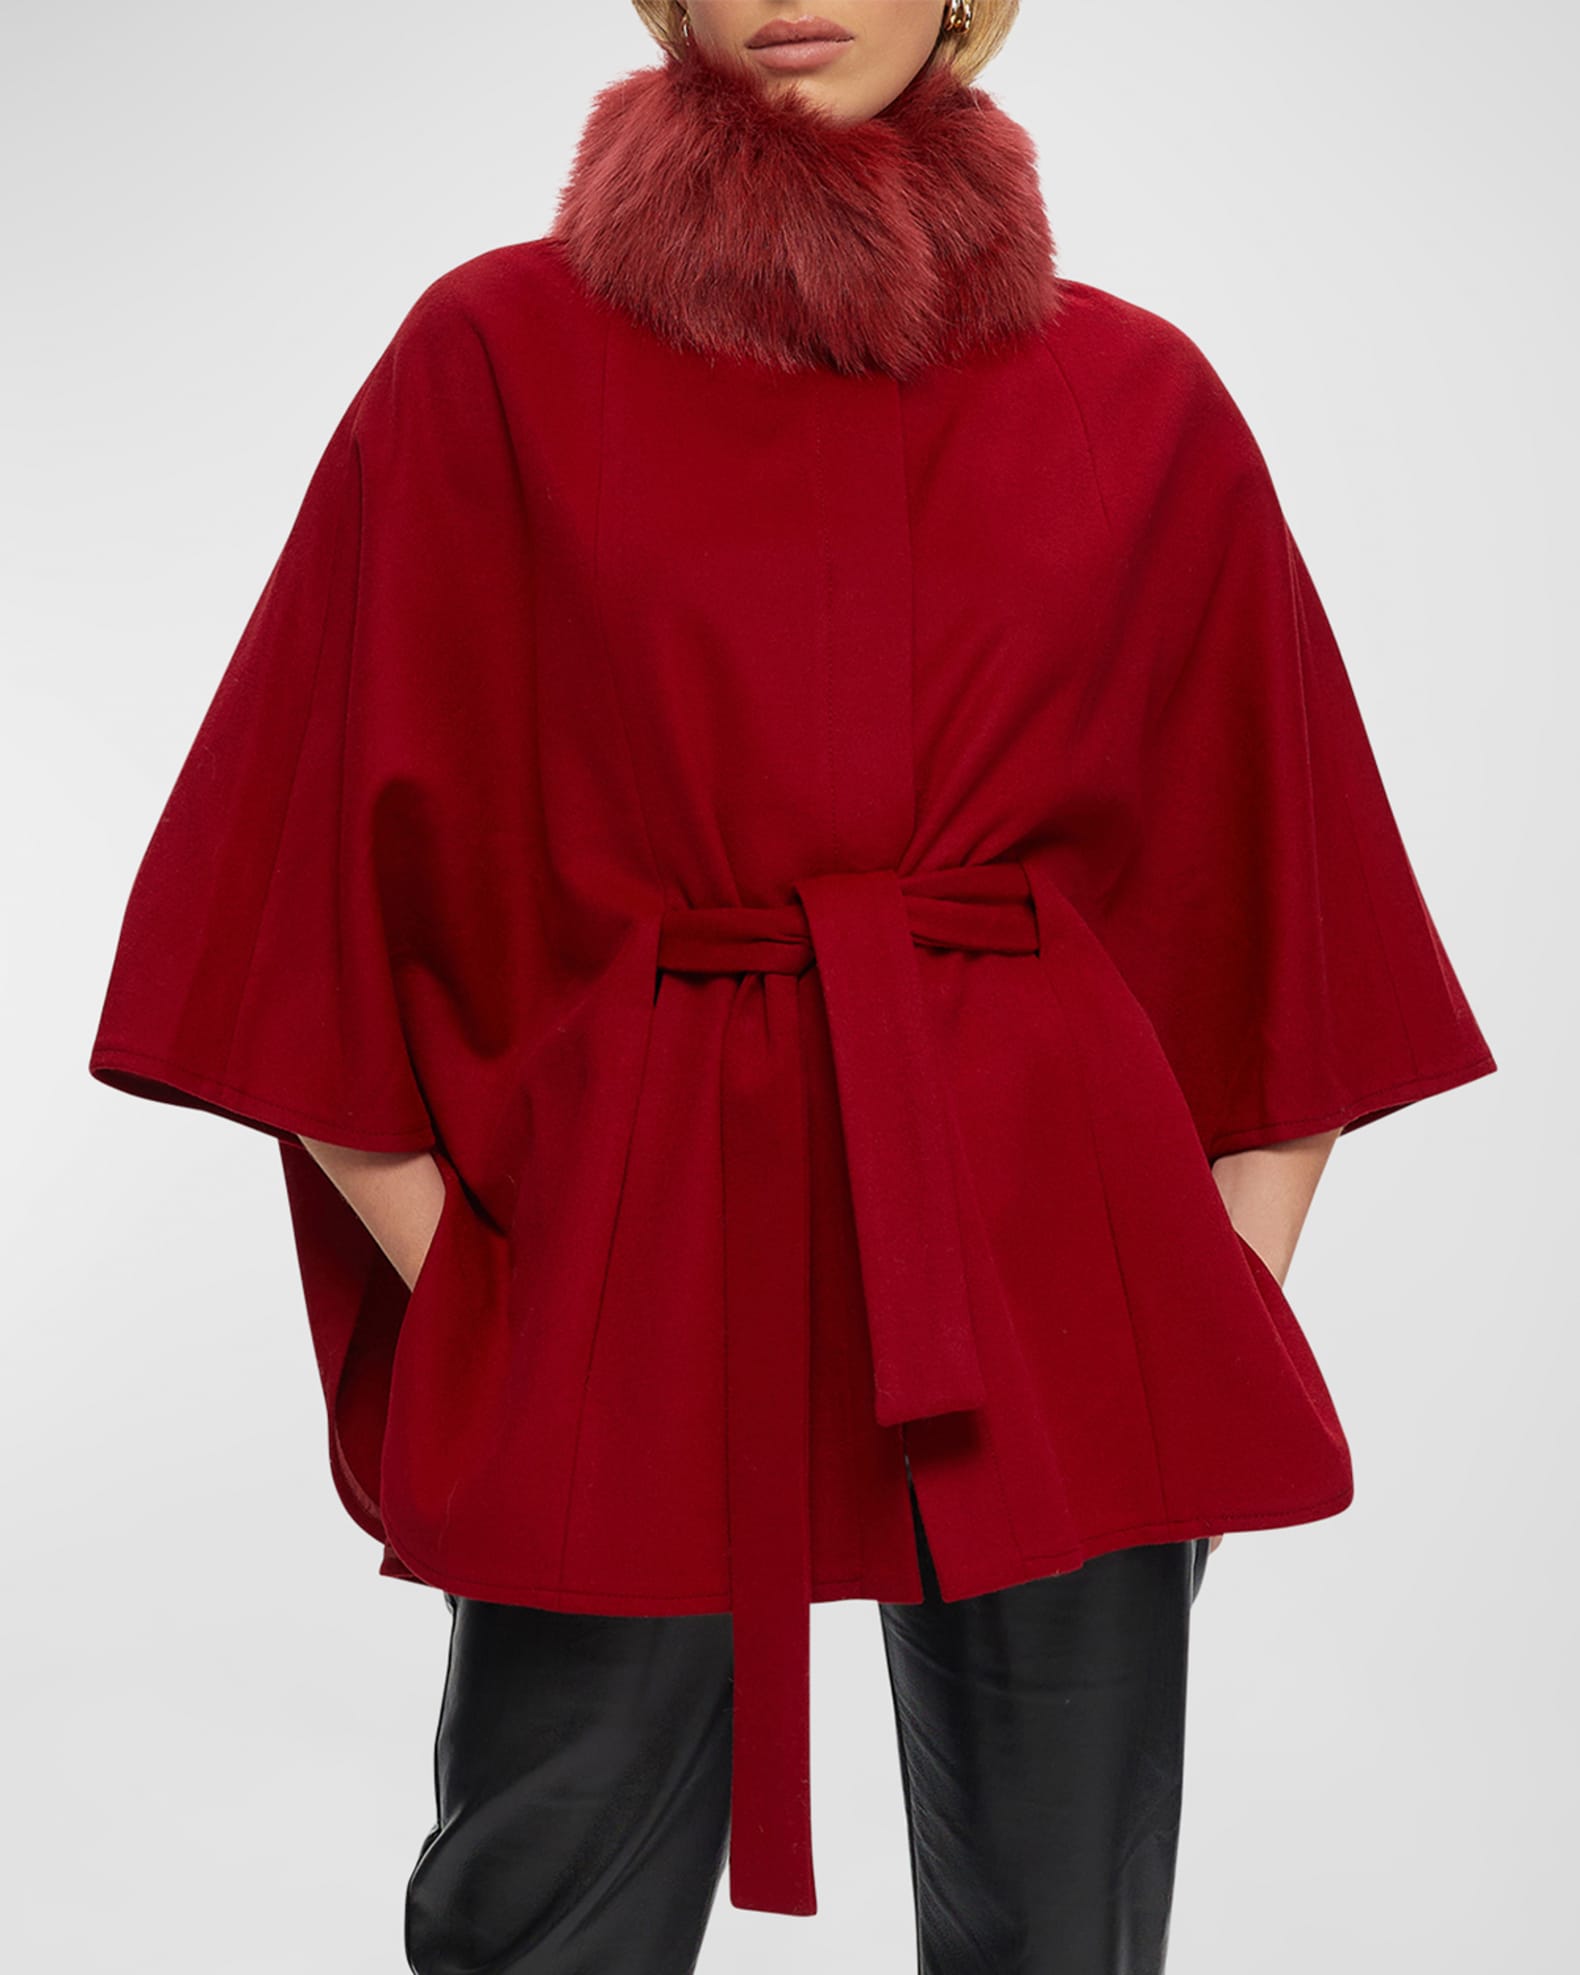 Gorski Wool Belted Cape with Toscana Lamb Shearling Collar | Neiman Marcus